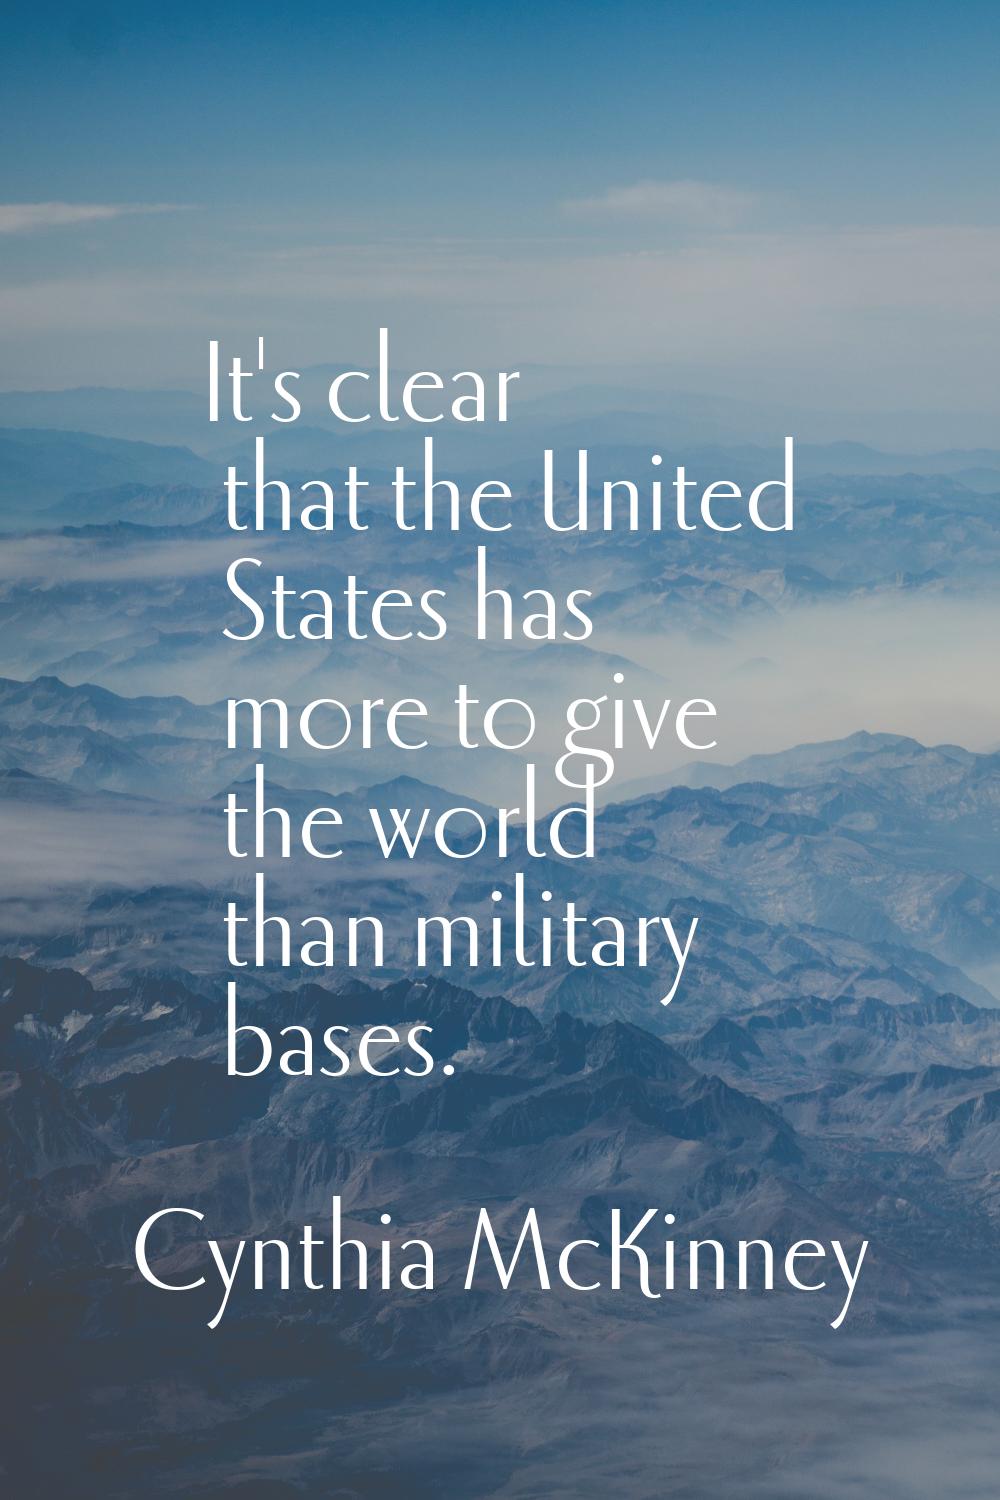 It's clear that the United States has more to give the world than military bases.